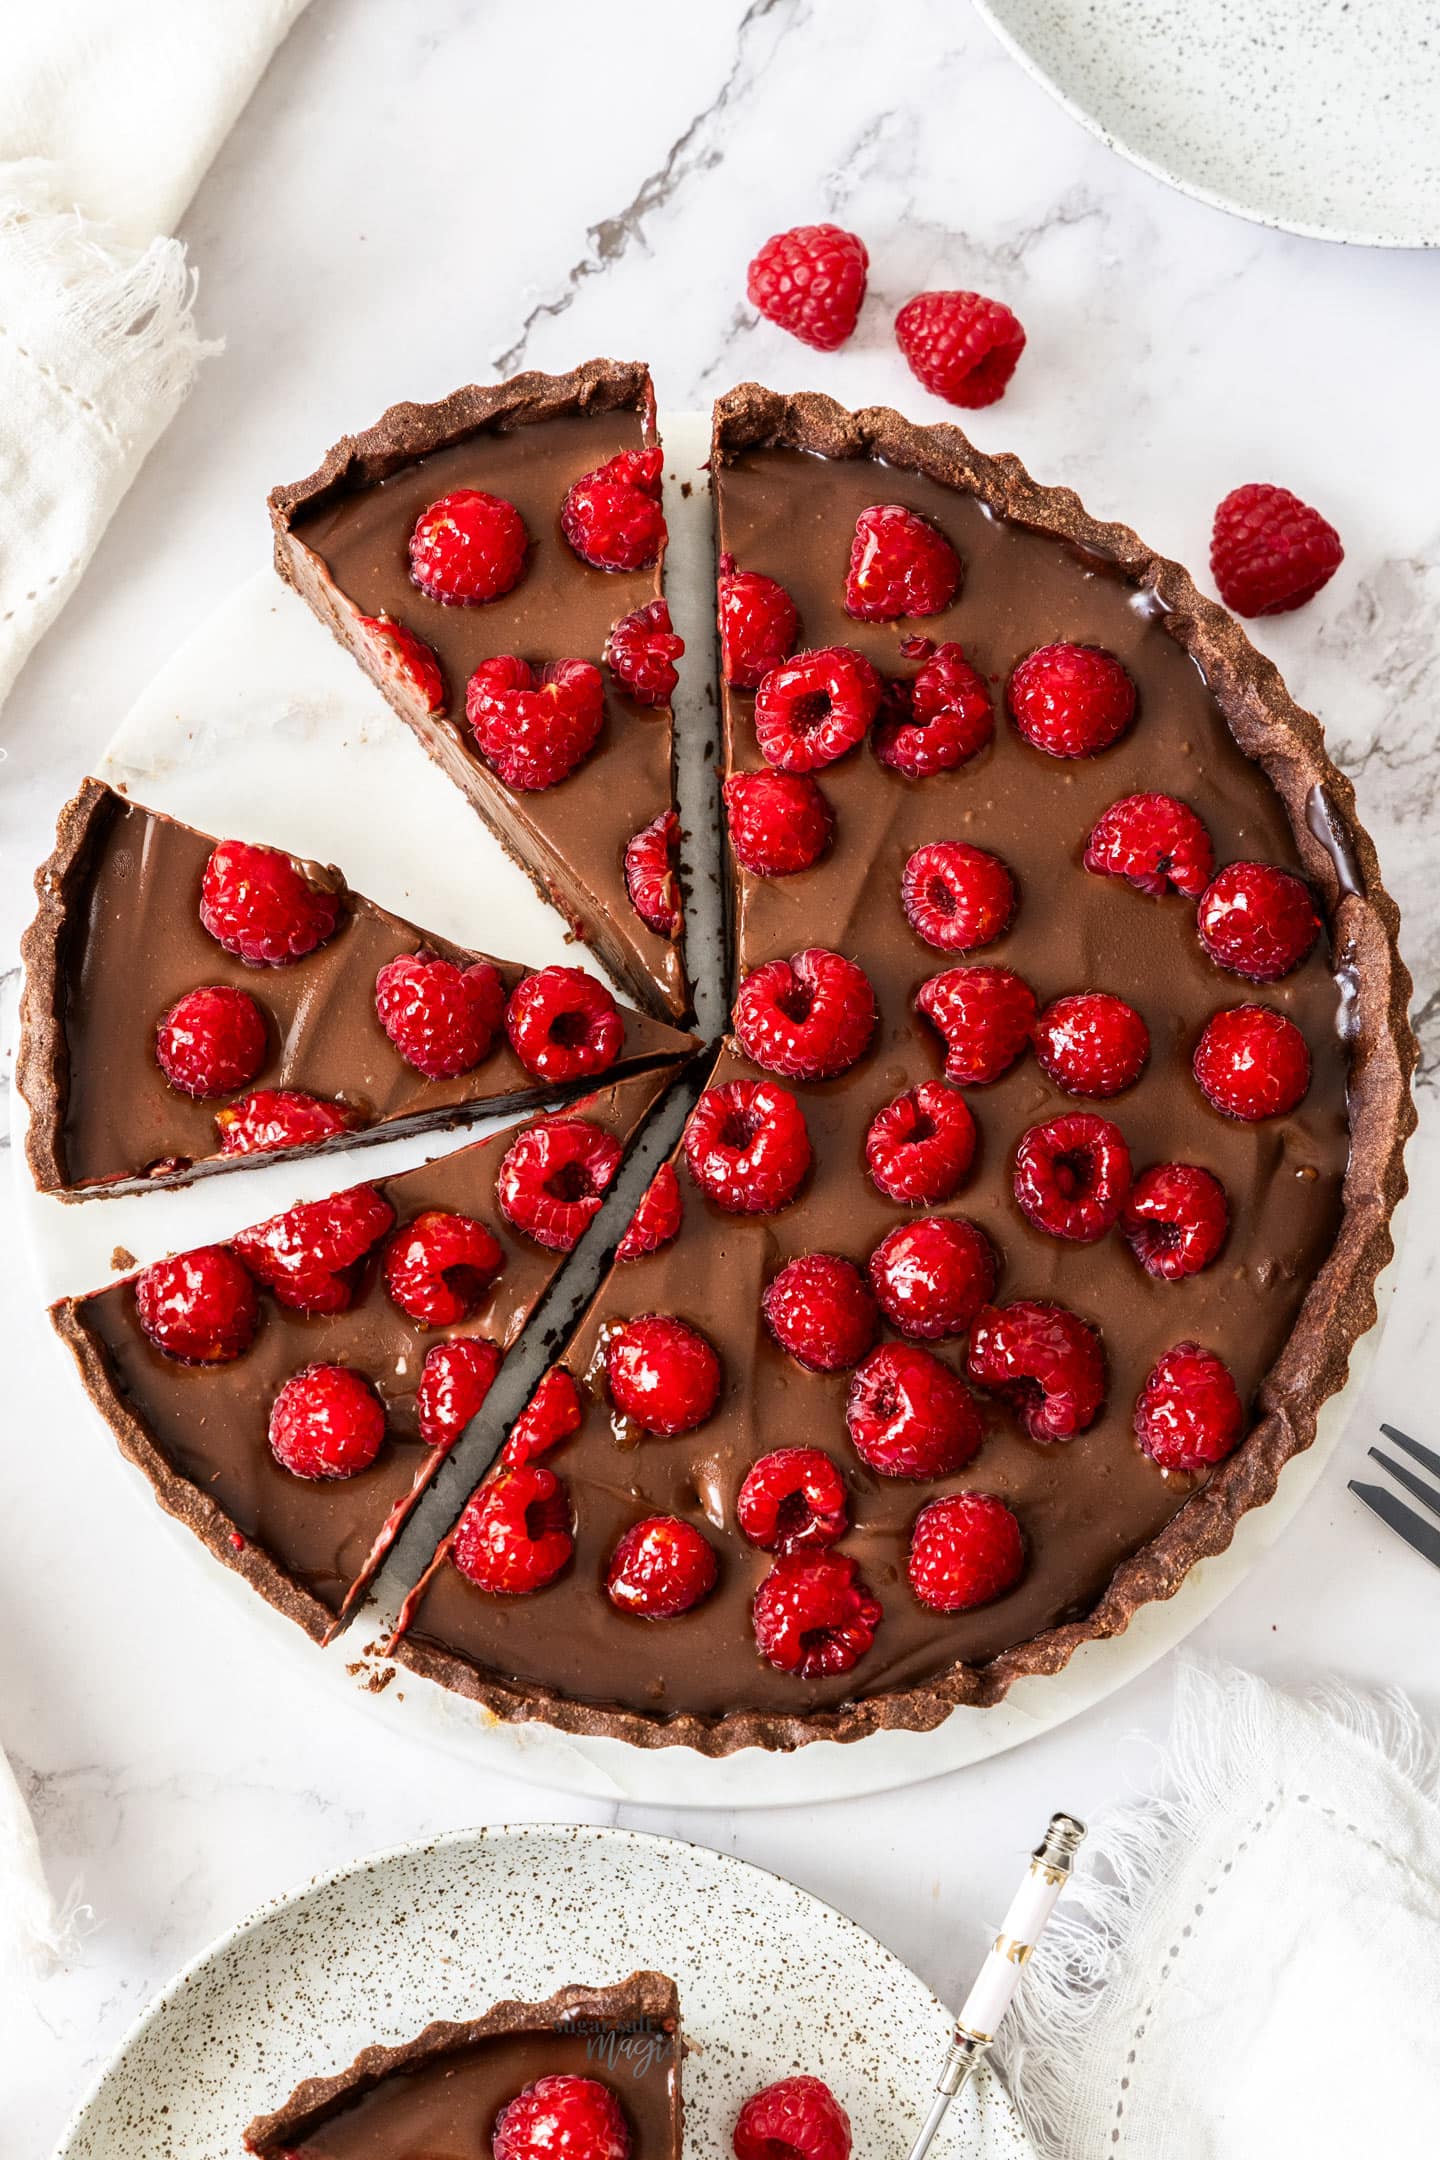 Top down view of a choc raspberry tart cut into slices.